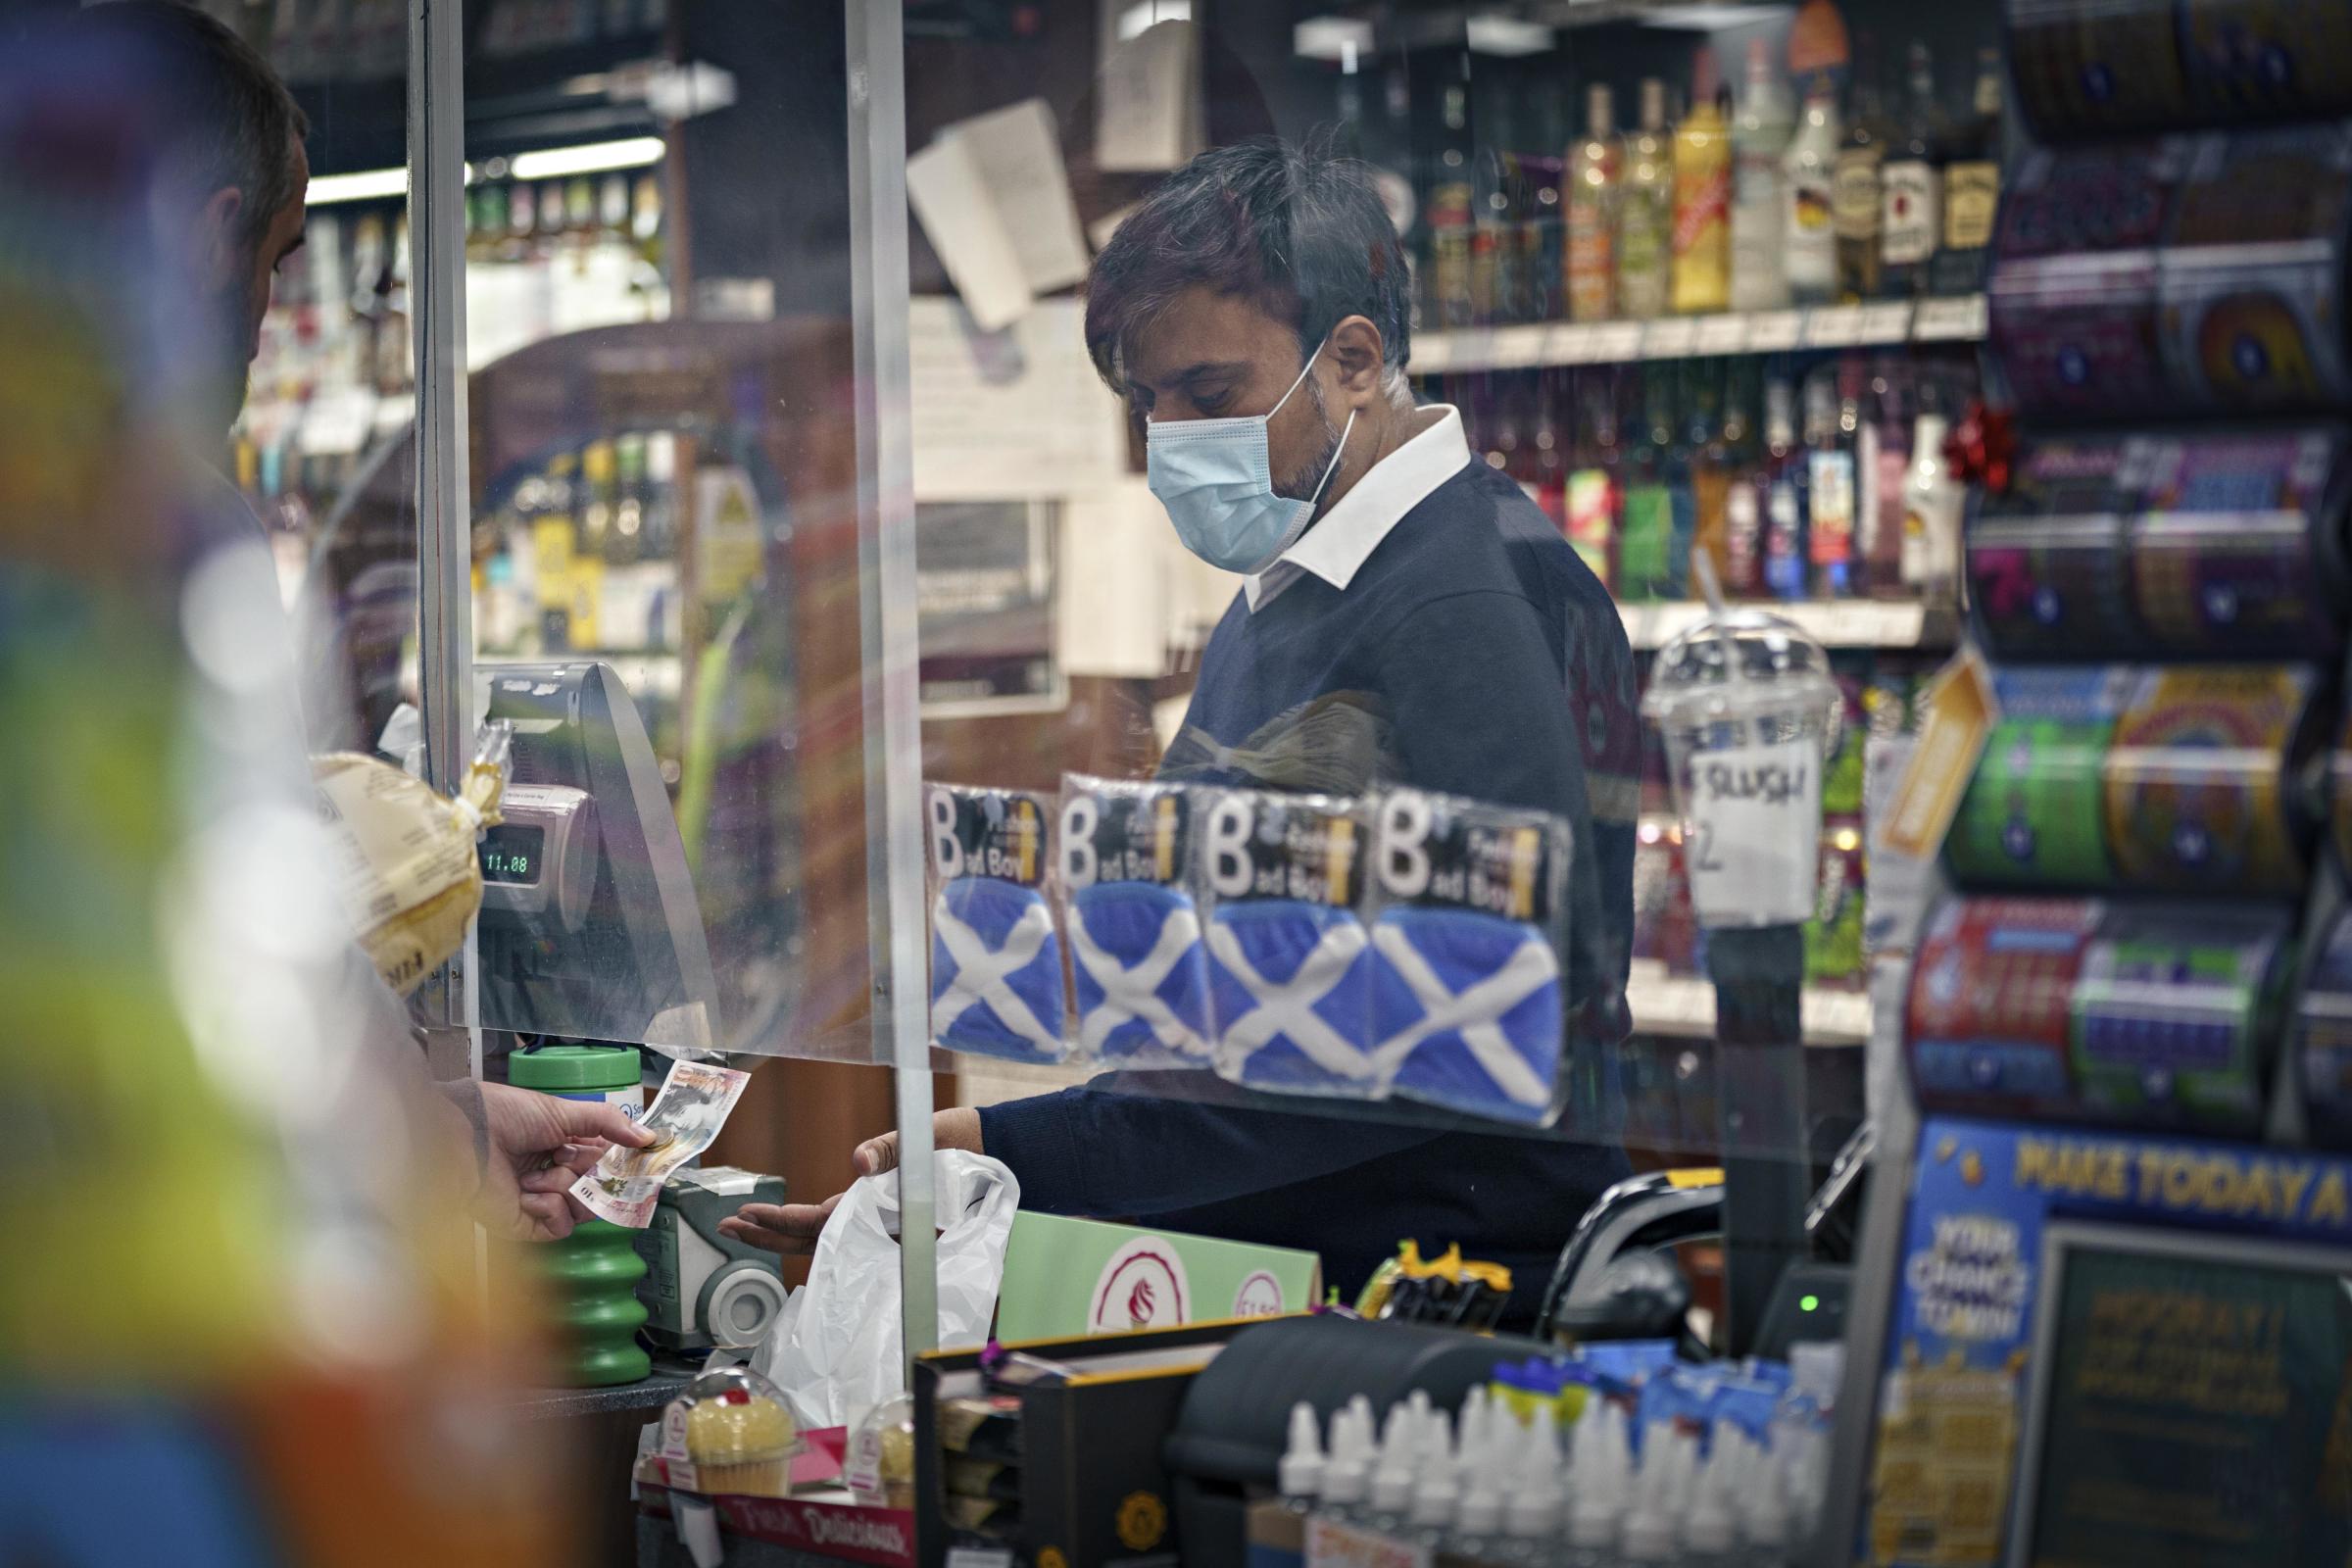 Mohammed Rajak has run his store for 30 years and been part of the community. Picture: Jamie Simpson / Scottish Grocers Federation.